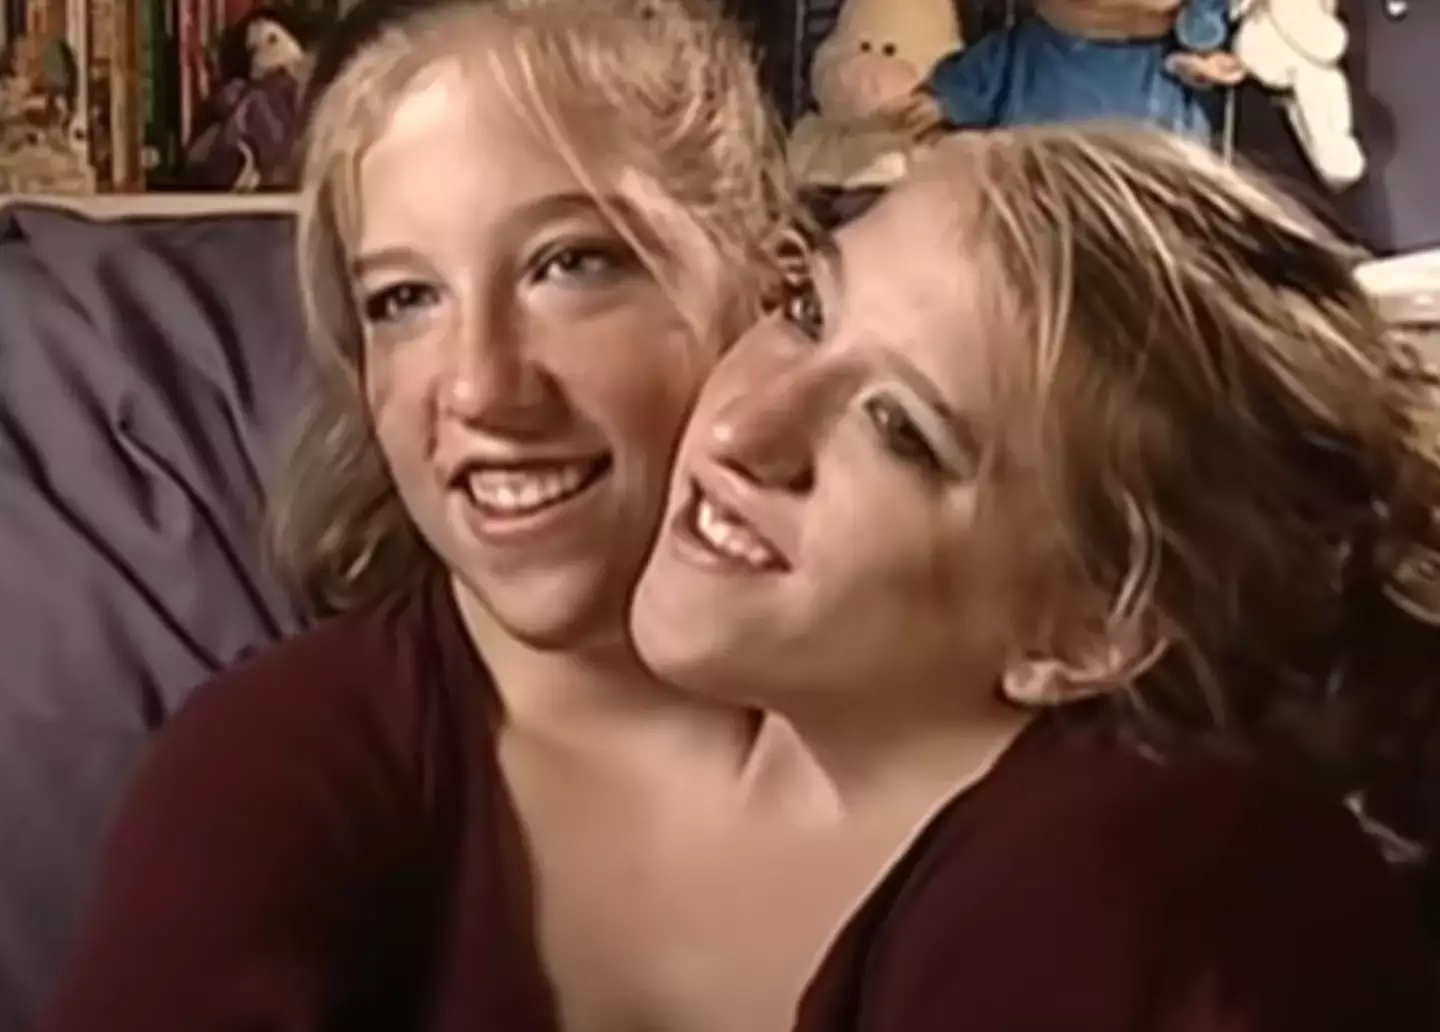 Abby & Brittany made their first appearance on Oprah in 1996.